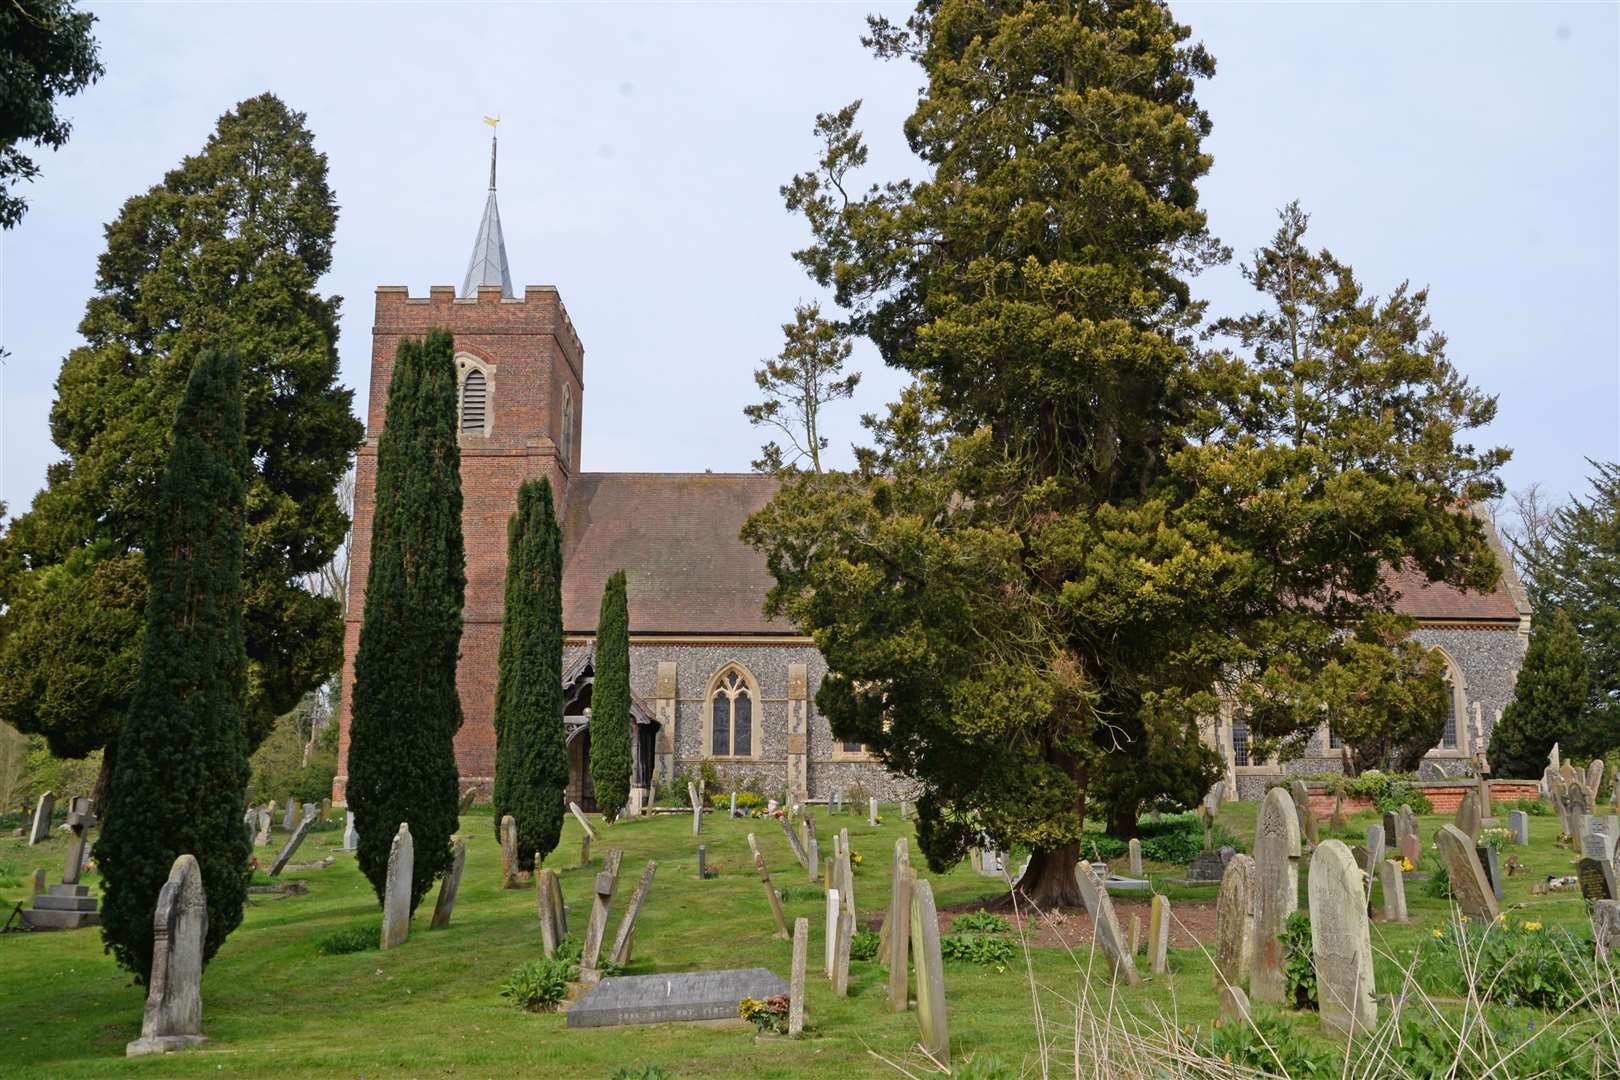 St Mary's Church, Stansted Mountfitchet. Picture: Vikki Lince (41148189)